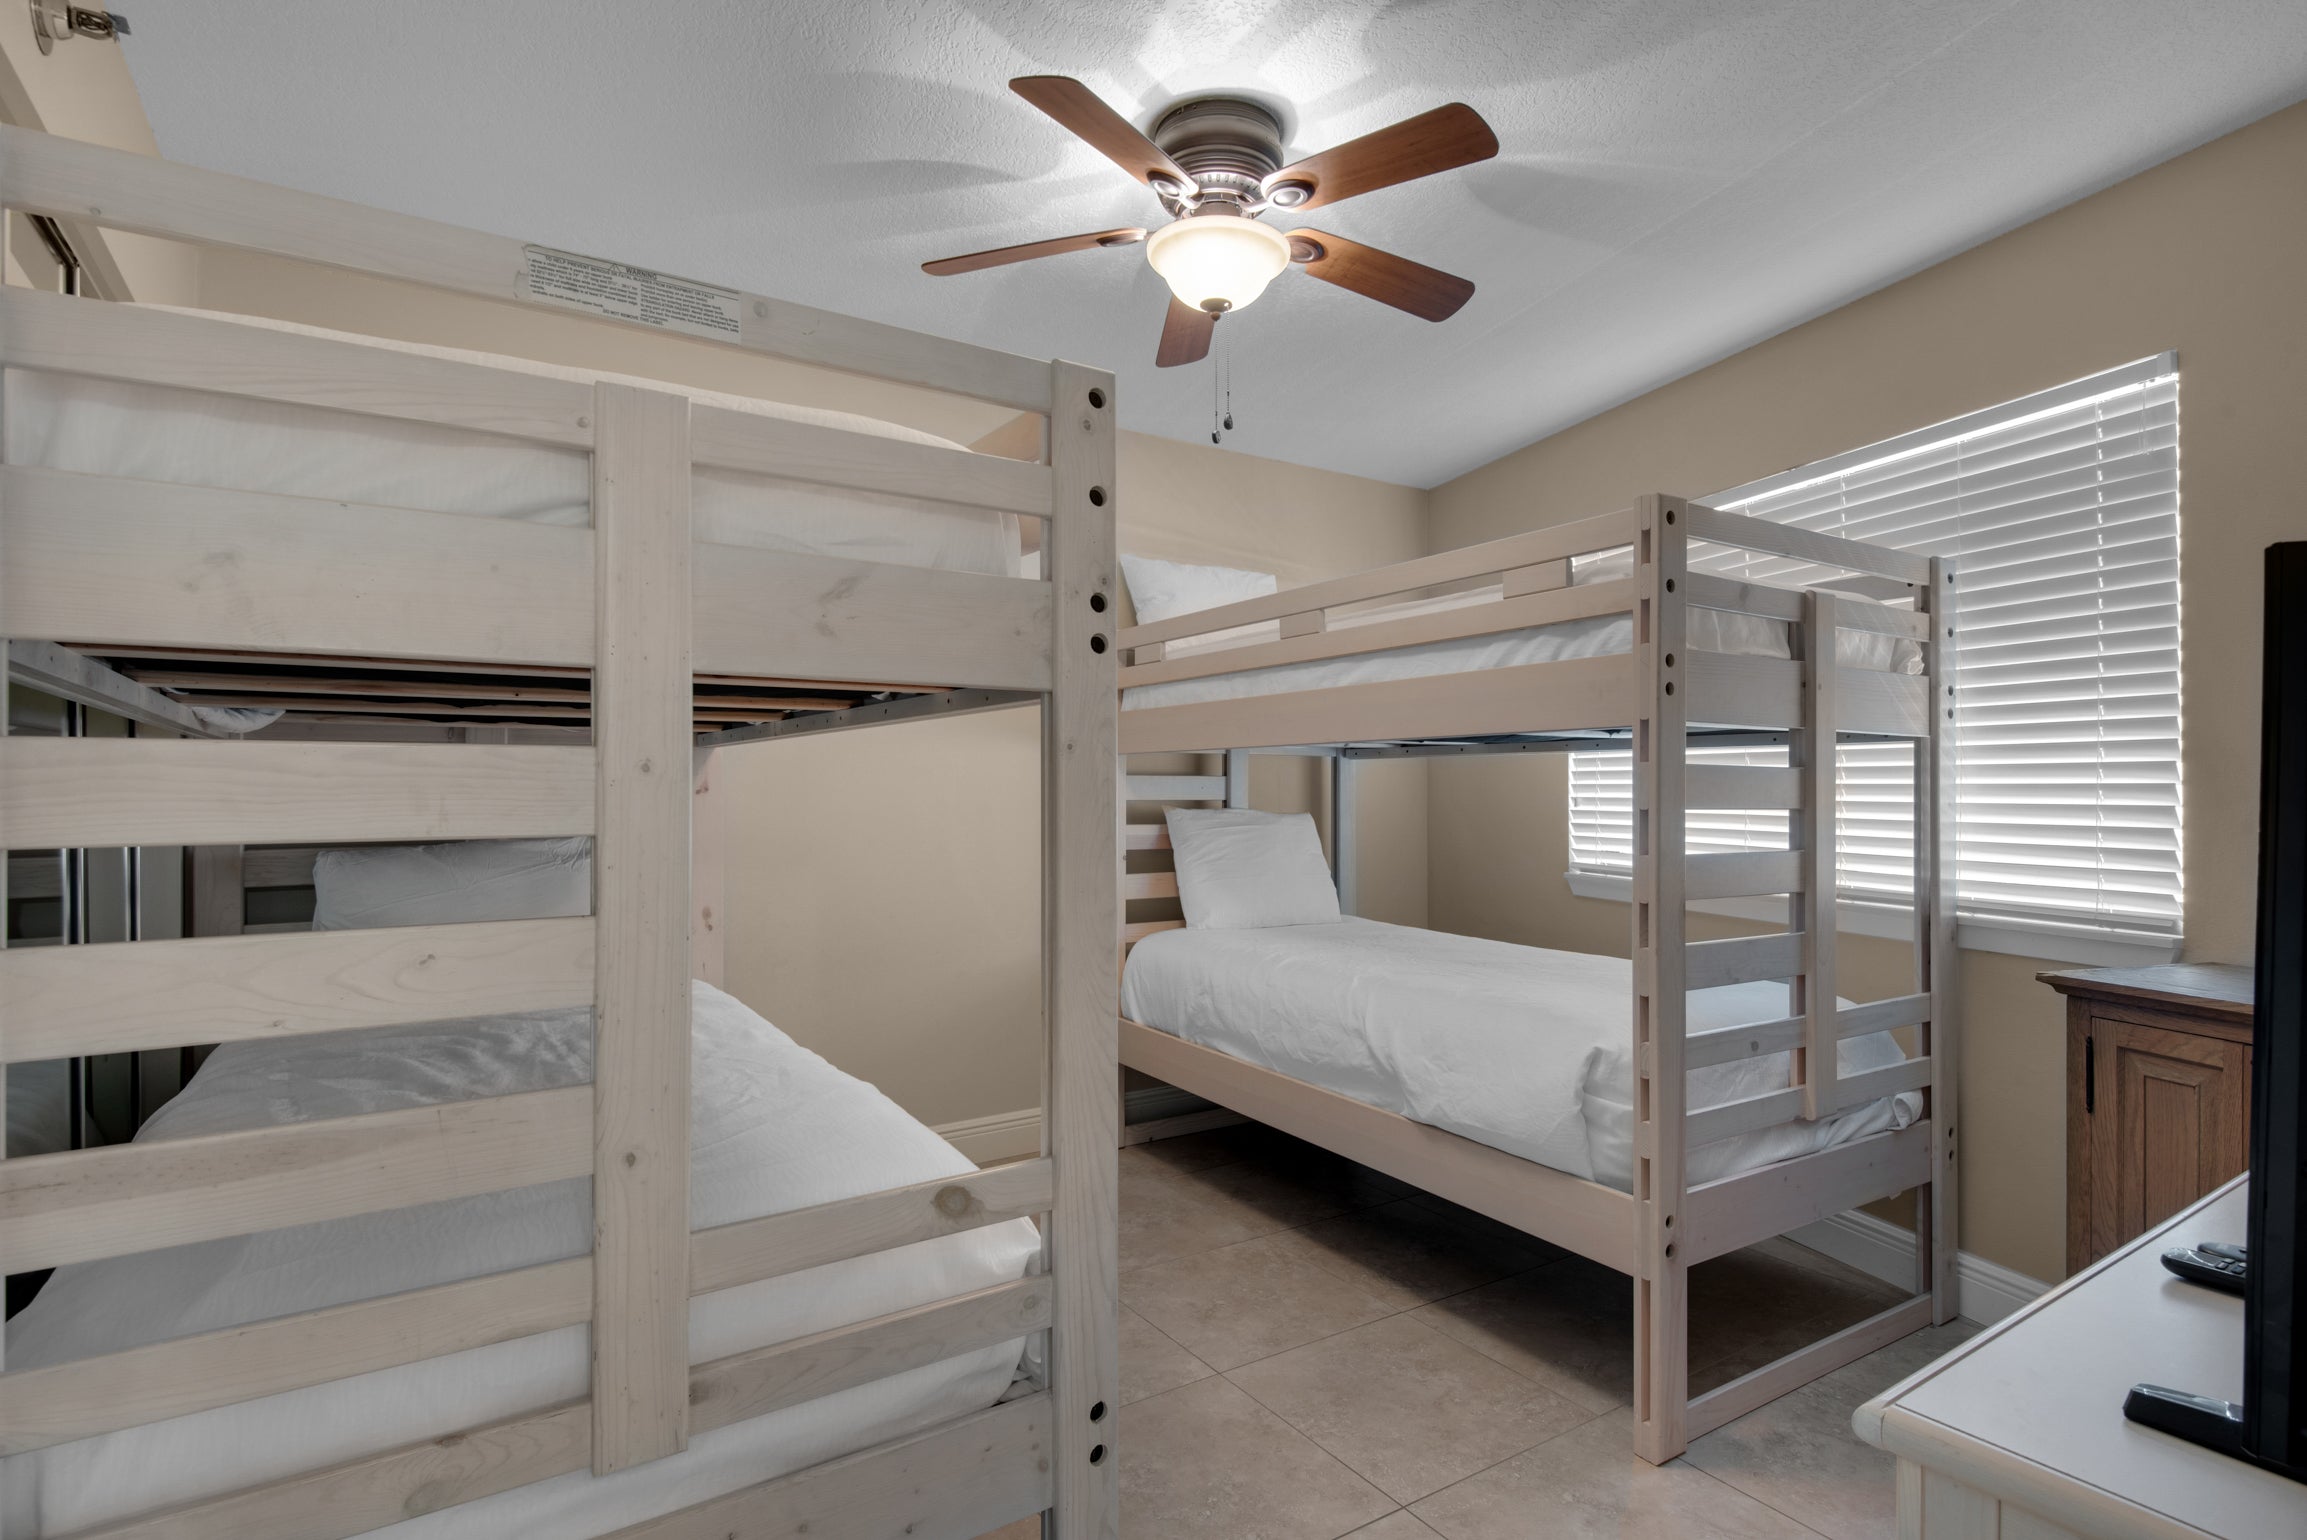 Bunk room with 2 sets of bunk beds